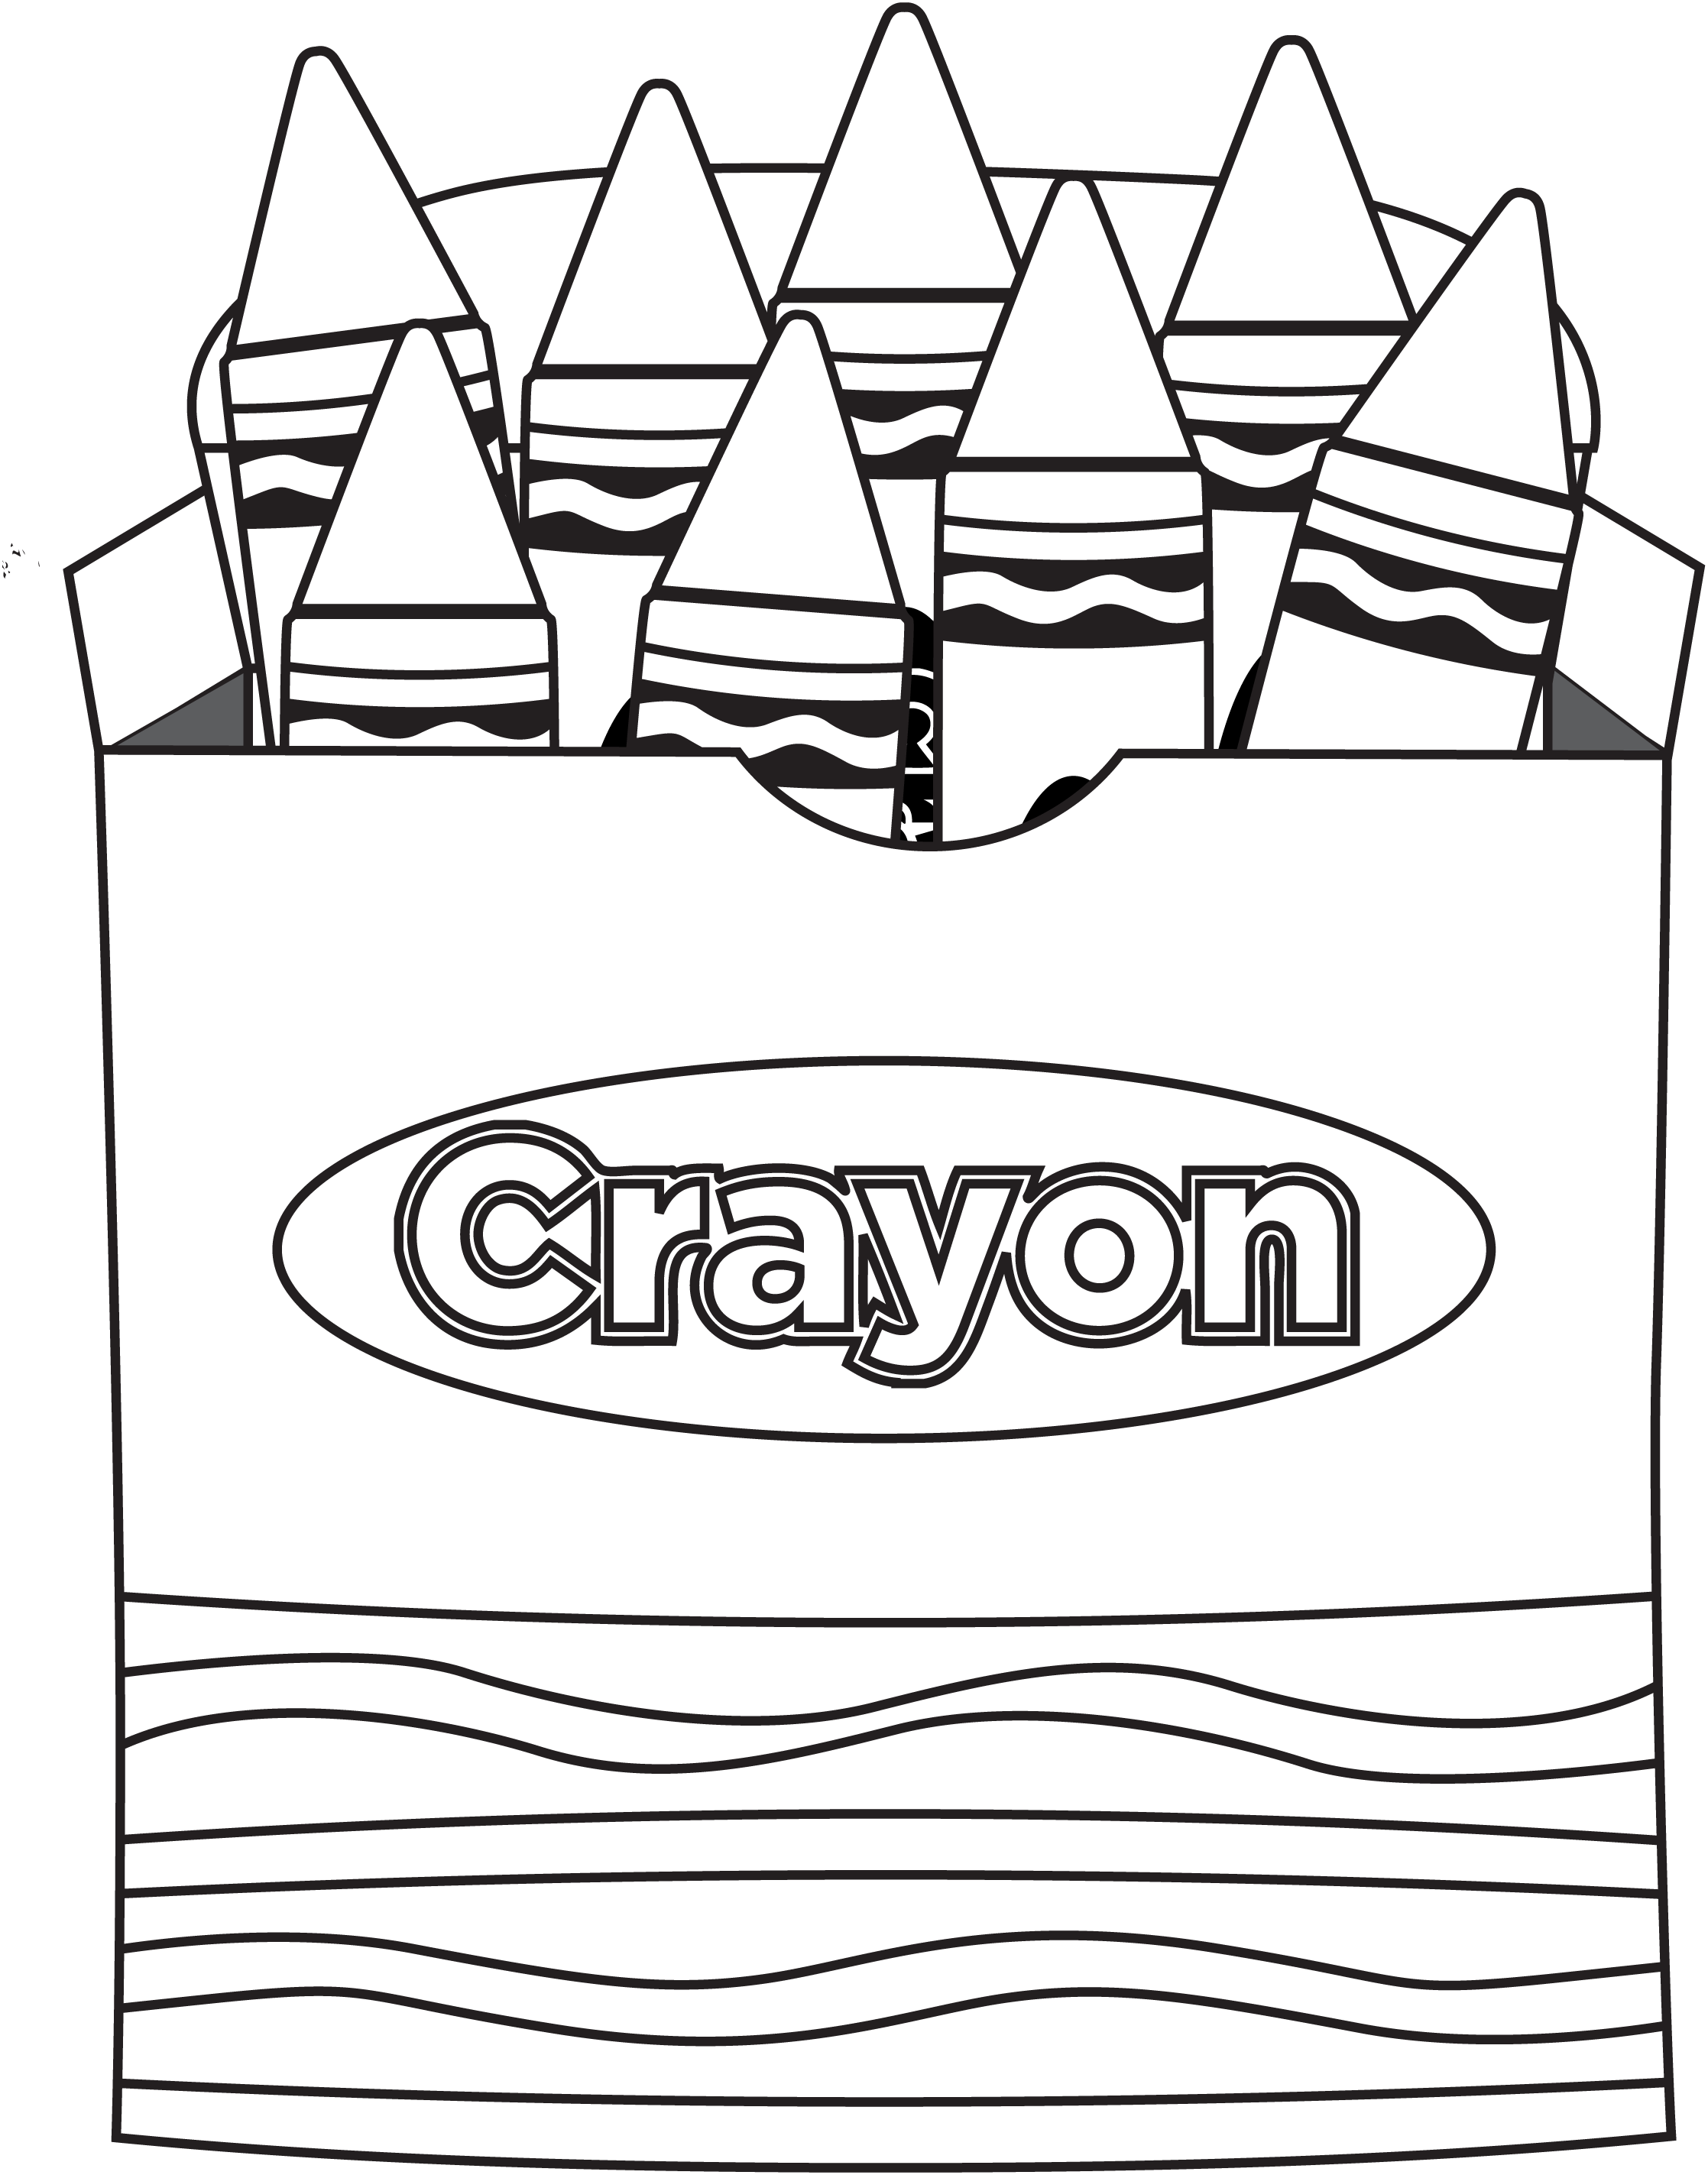 The Day The Crayons Quit Coloring Page